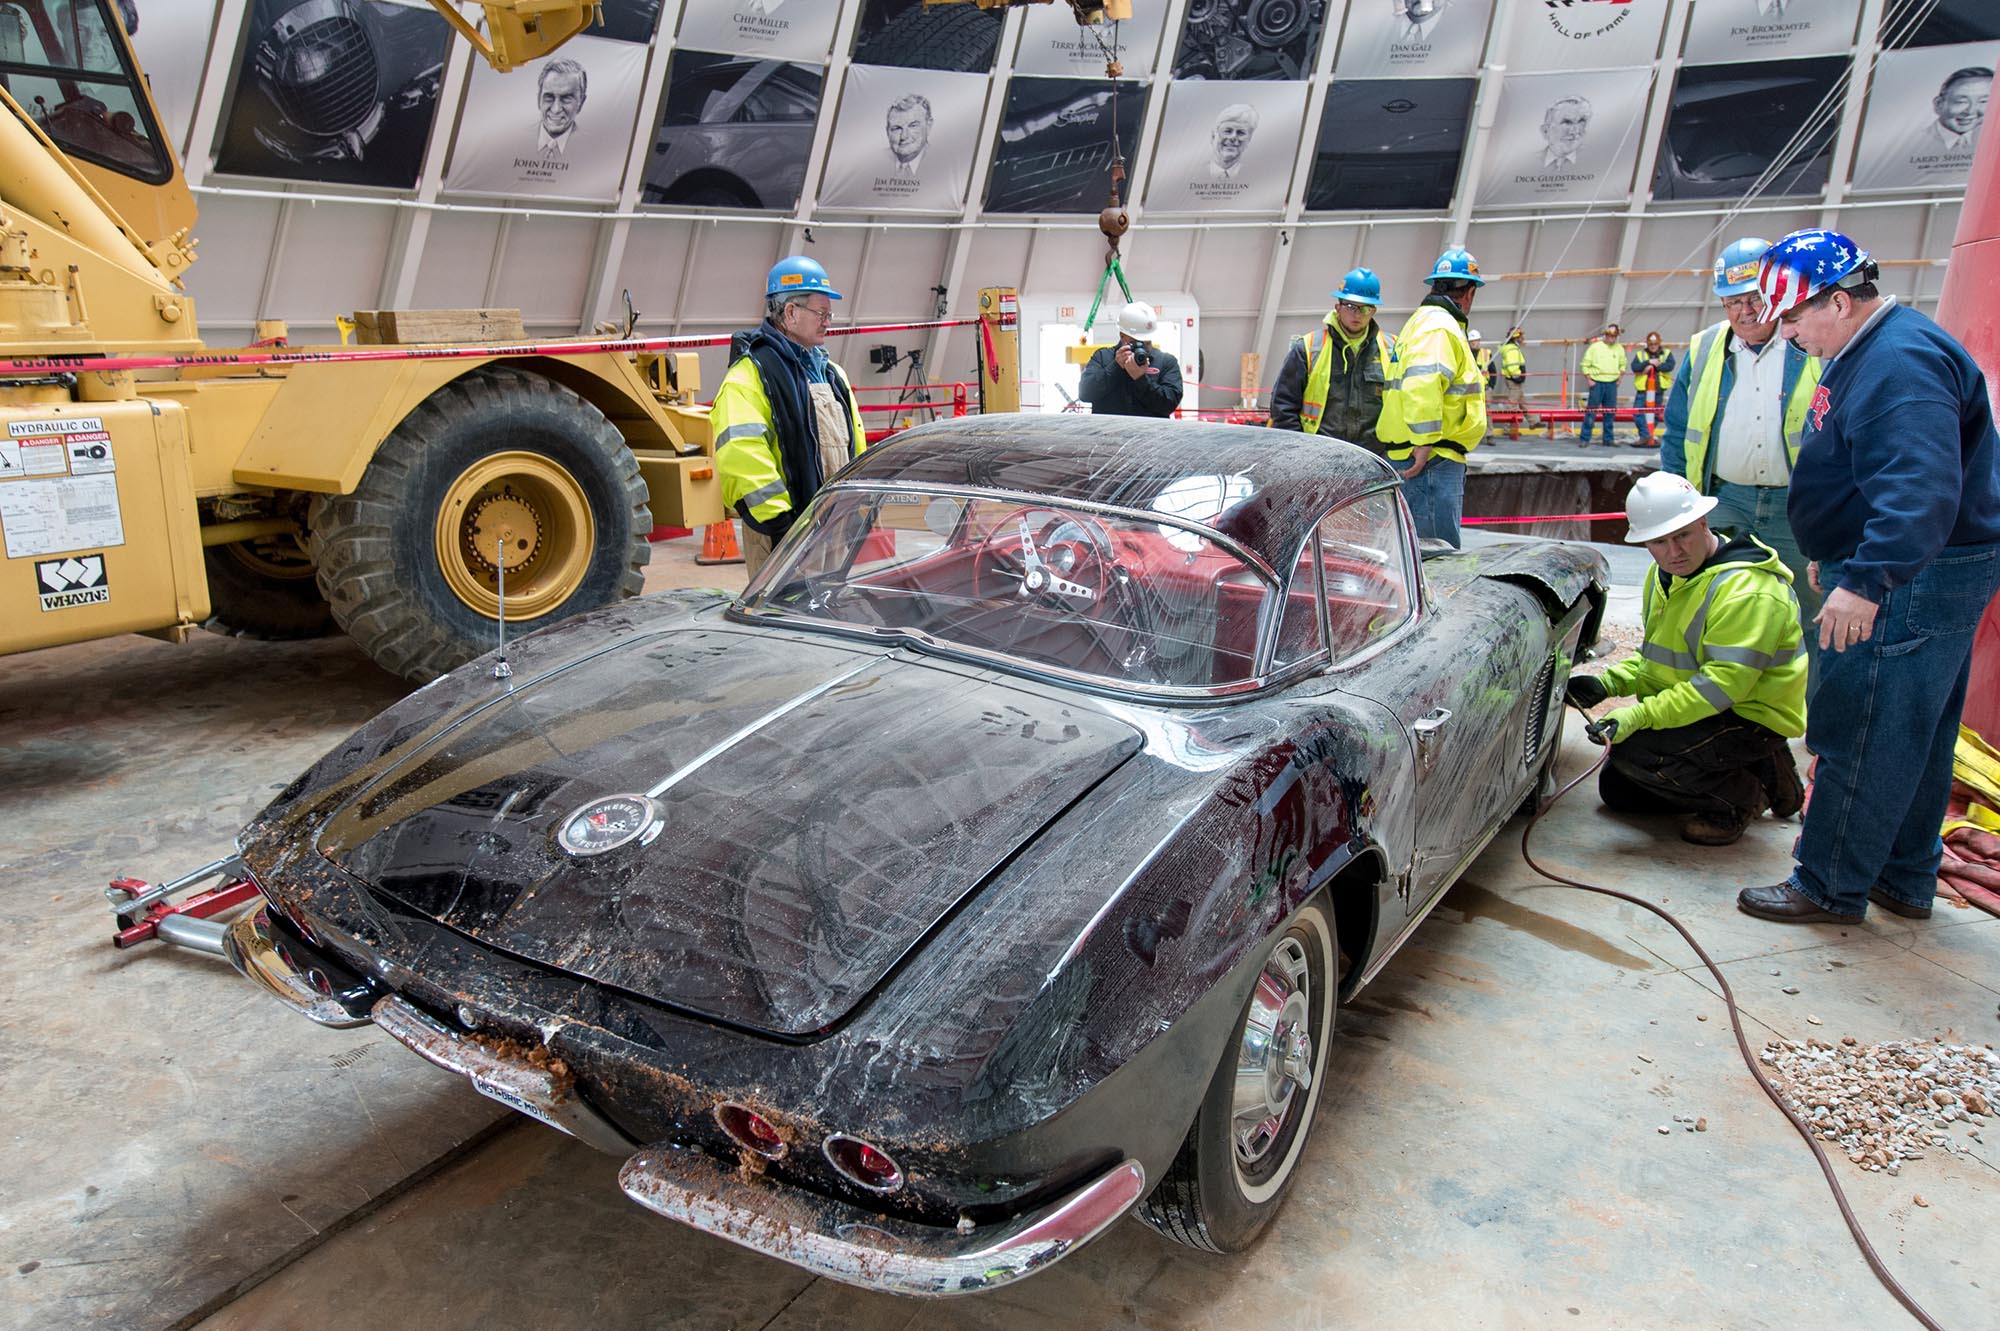 The 1962 Chevrolet Corvette ZR-1 being recovered from the 2014 sinkhole at the Corvette Museum